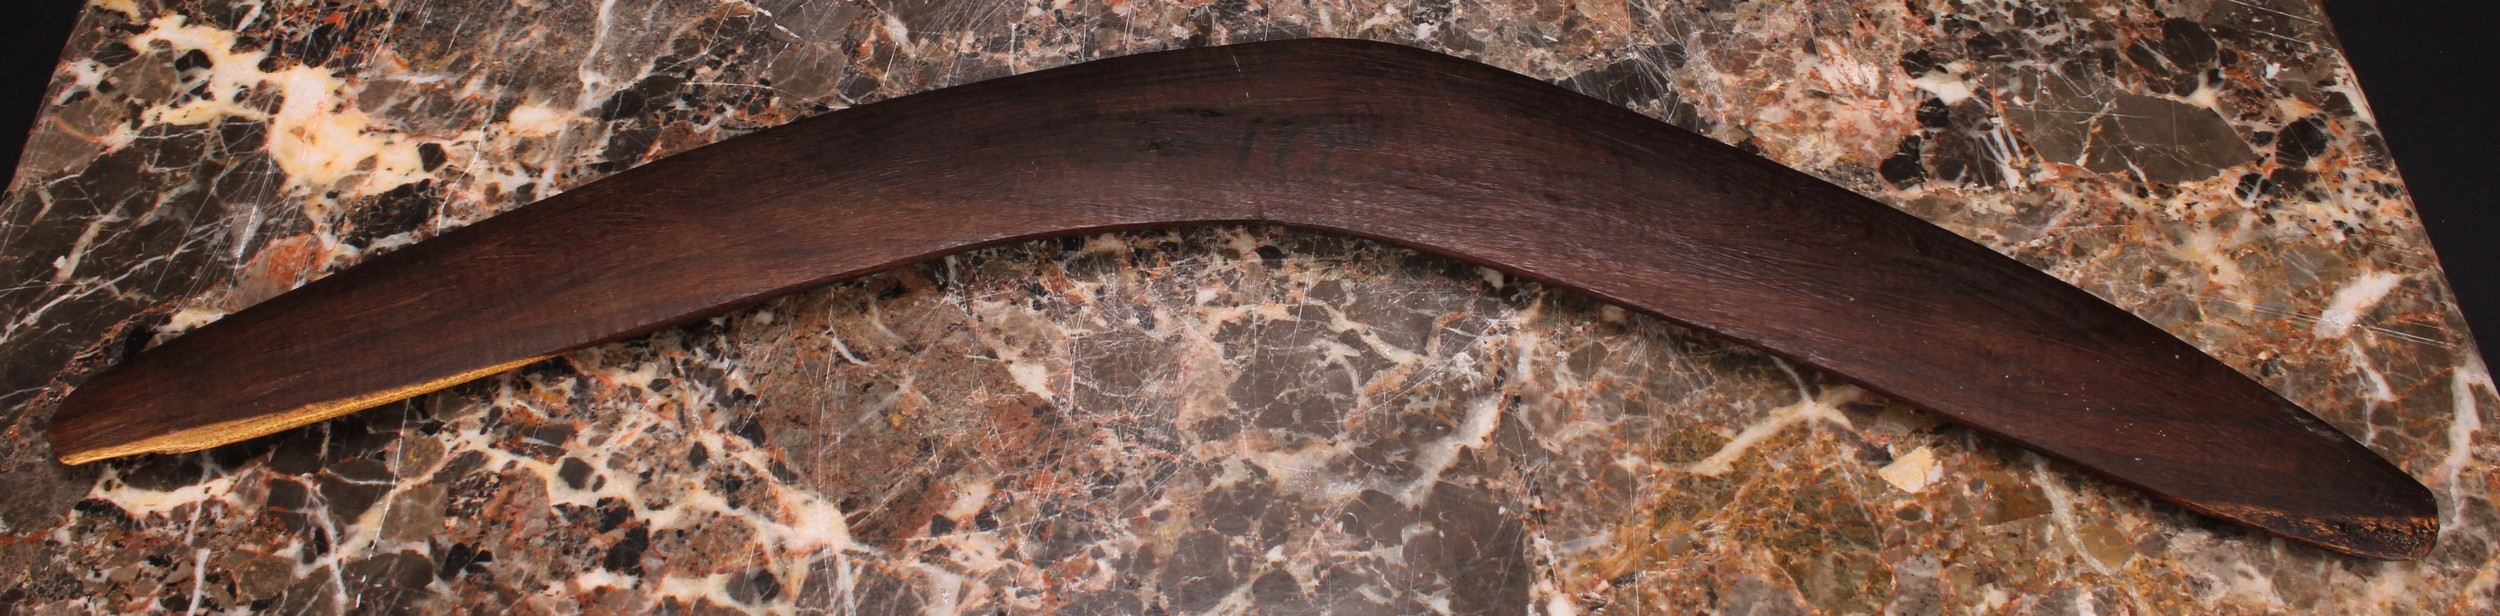 Australian Aboriginal Boomerang with geometric marks and depictions of Emu's, Leaves and - Image 3 of 3